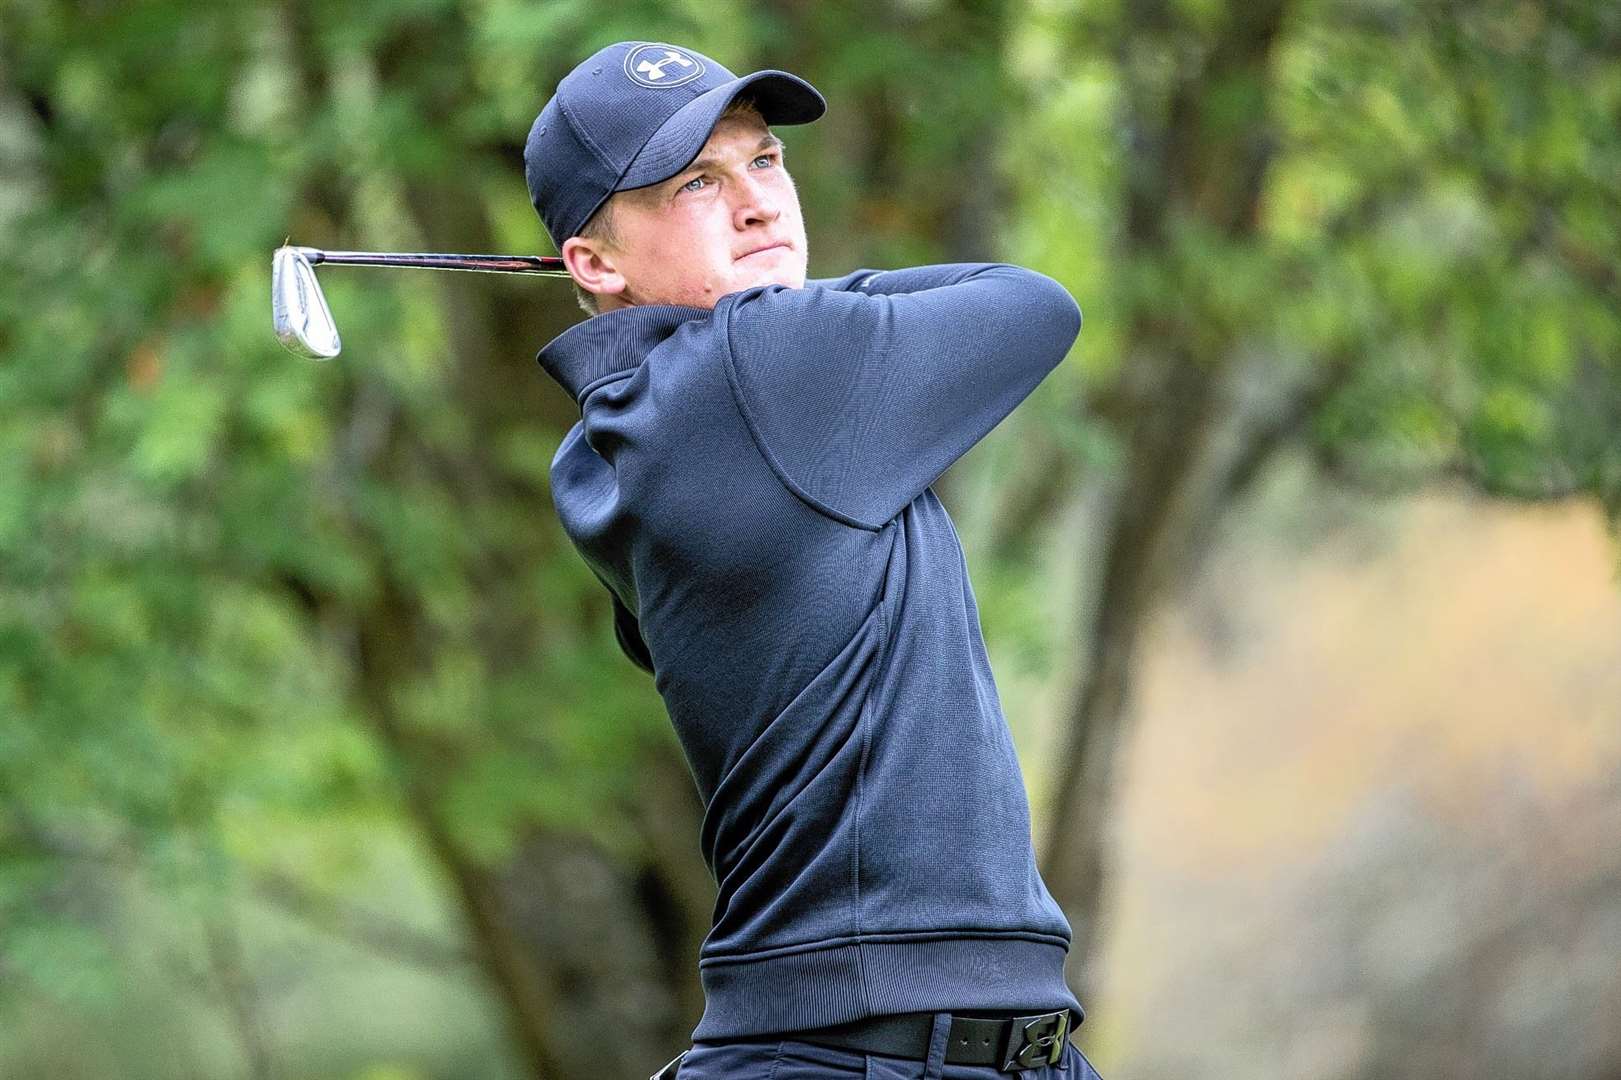 Sandy Scott is in the last 32 of the US Amateur Championship